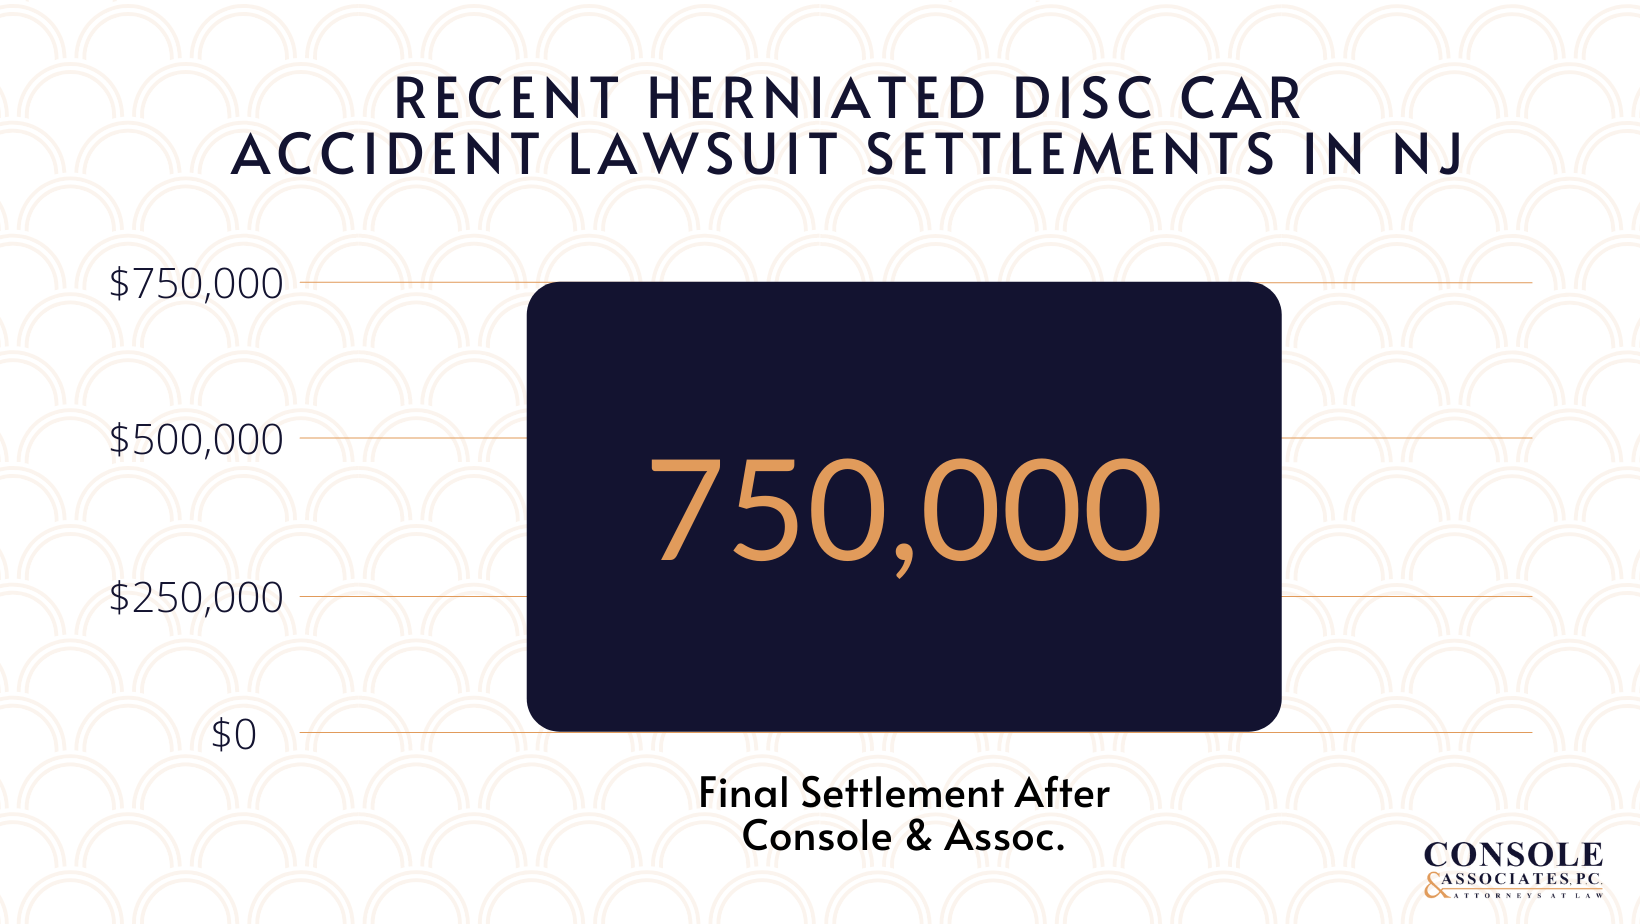 Copy of Recent Herniated Disc Car Accident Lawsuit Settlements in NJ